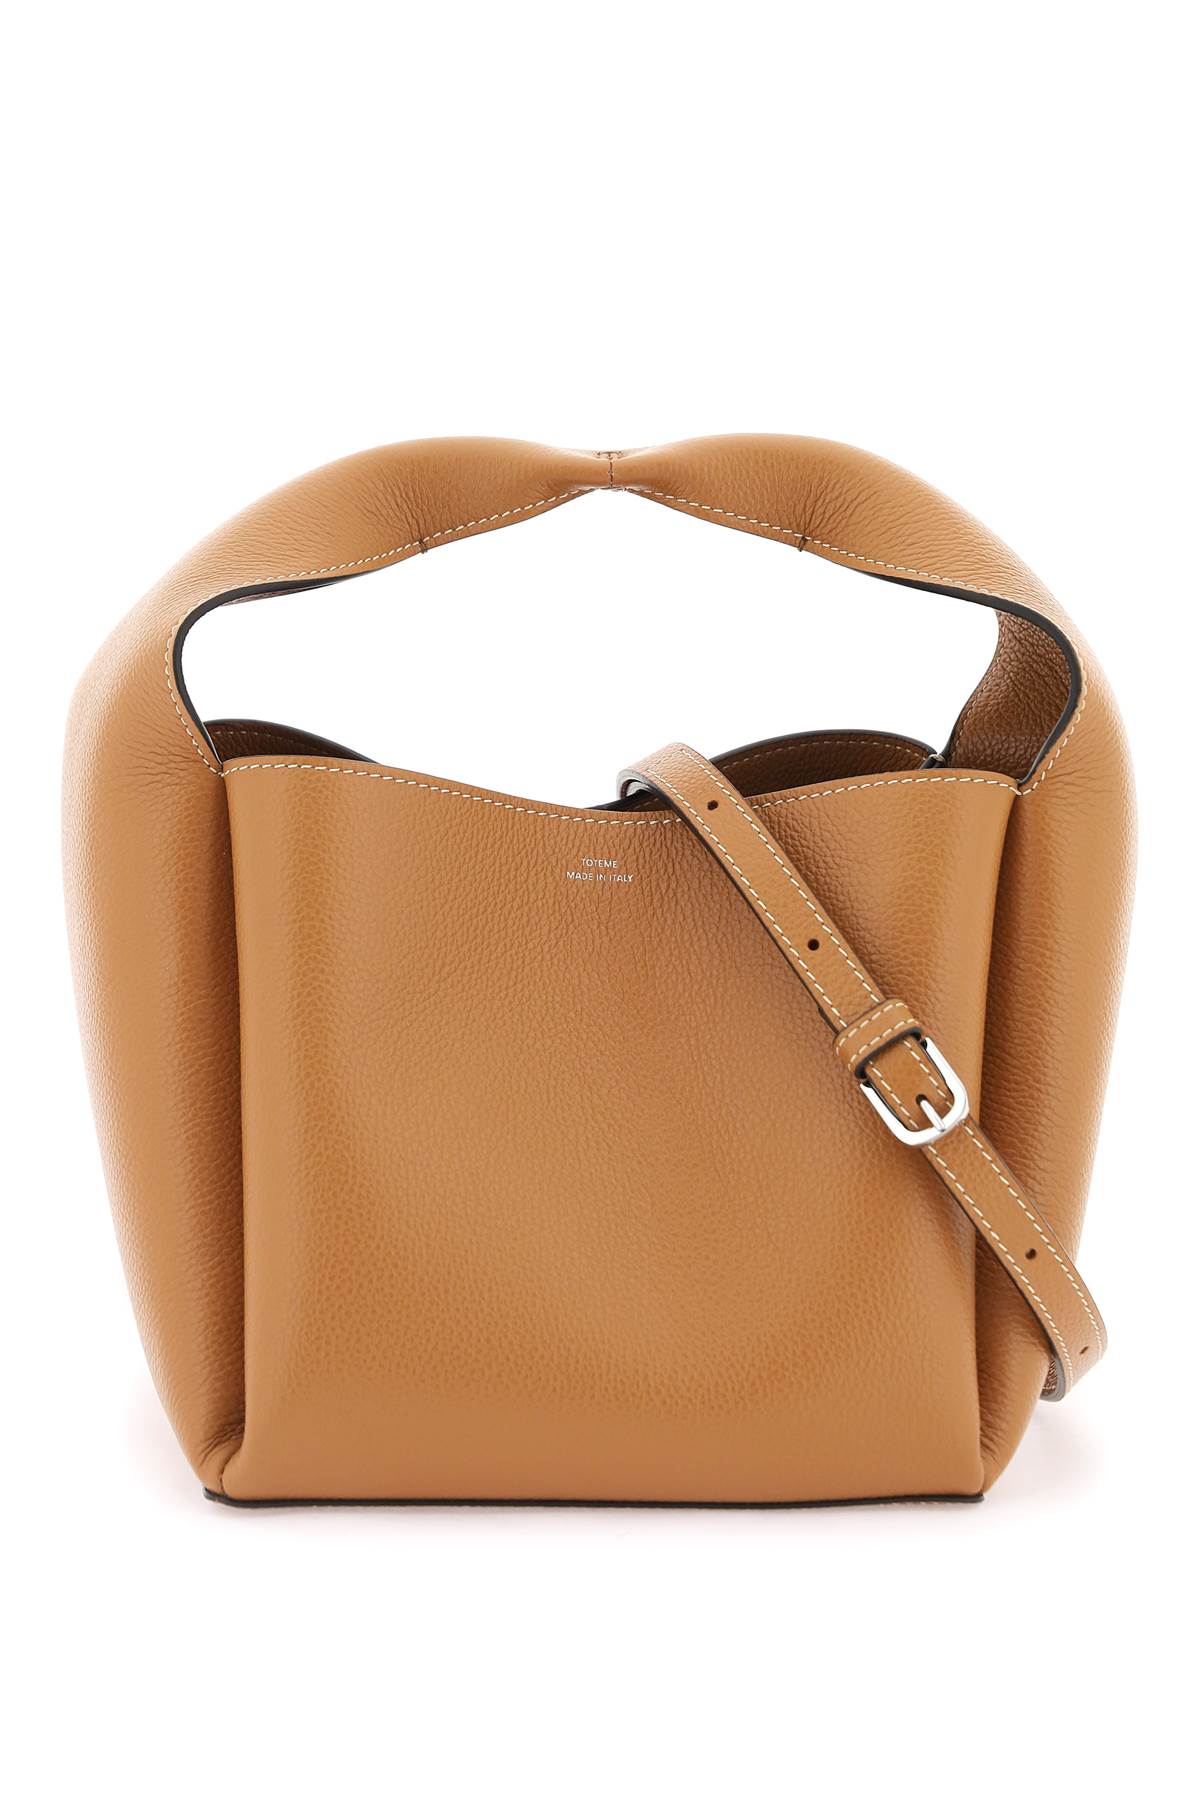 Toteme TOTEME hammered leather bucket bag